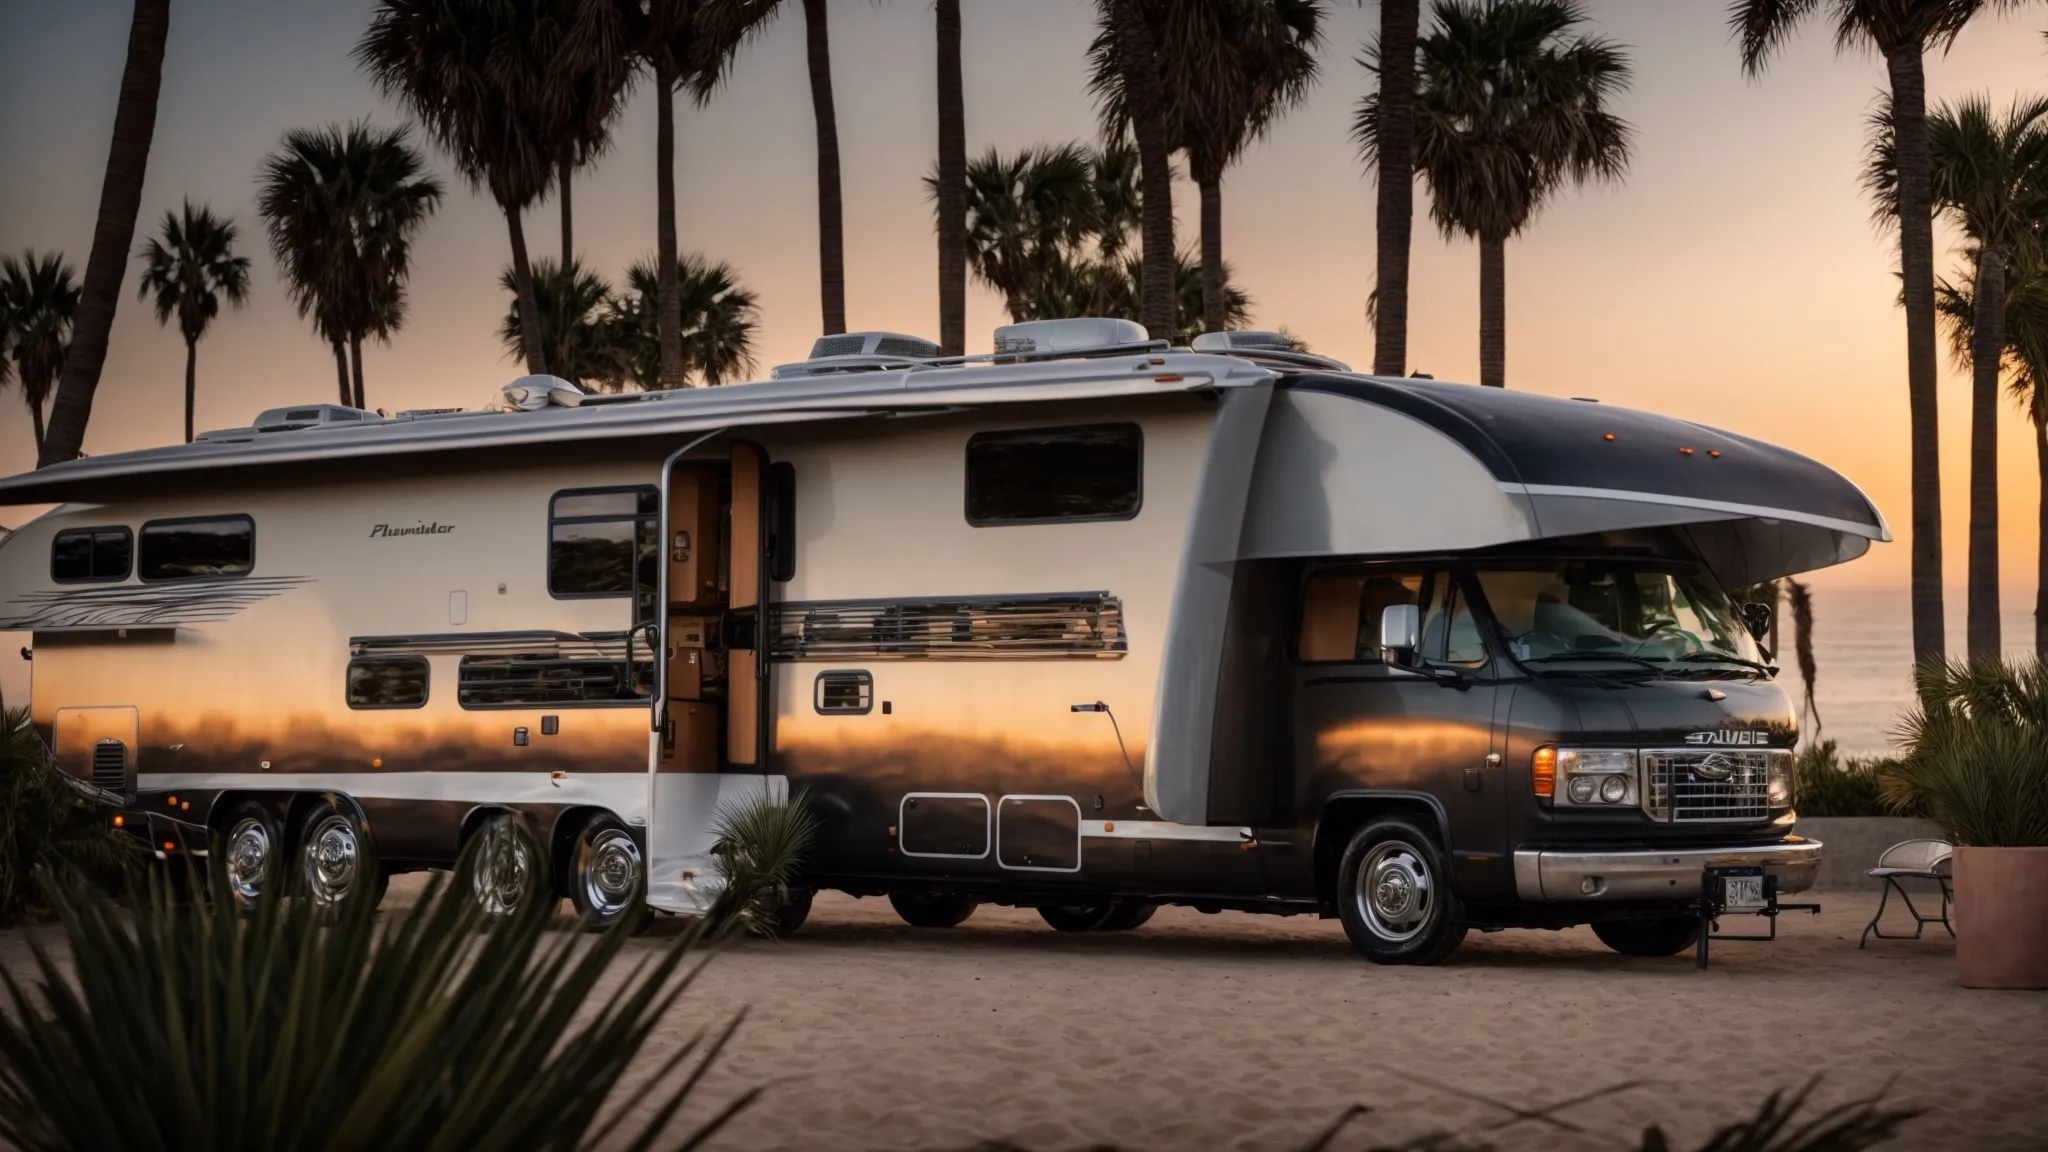 an image of sleek rvs parked amidst palm trees with plush outdoor seating areas and a backdrop of majestic pacific coast sunset.